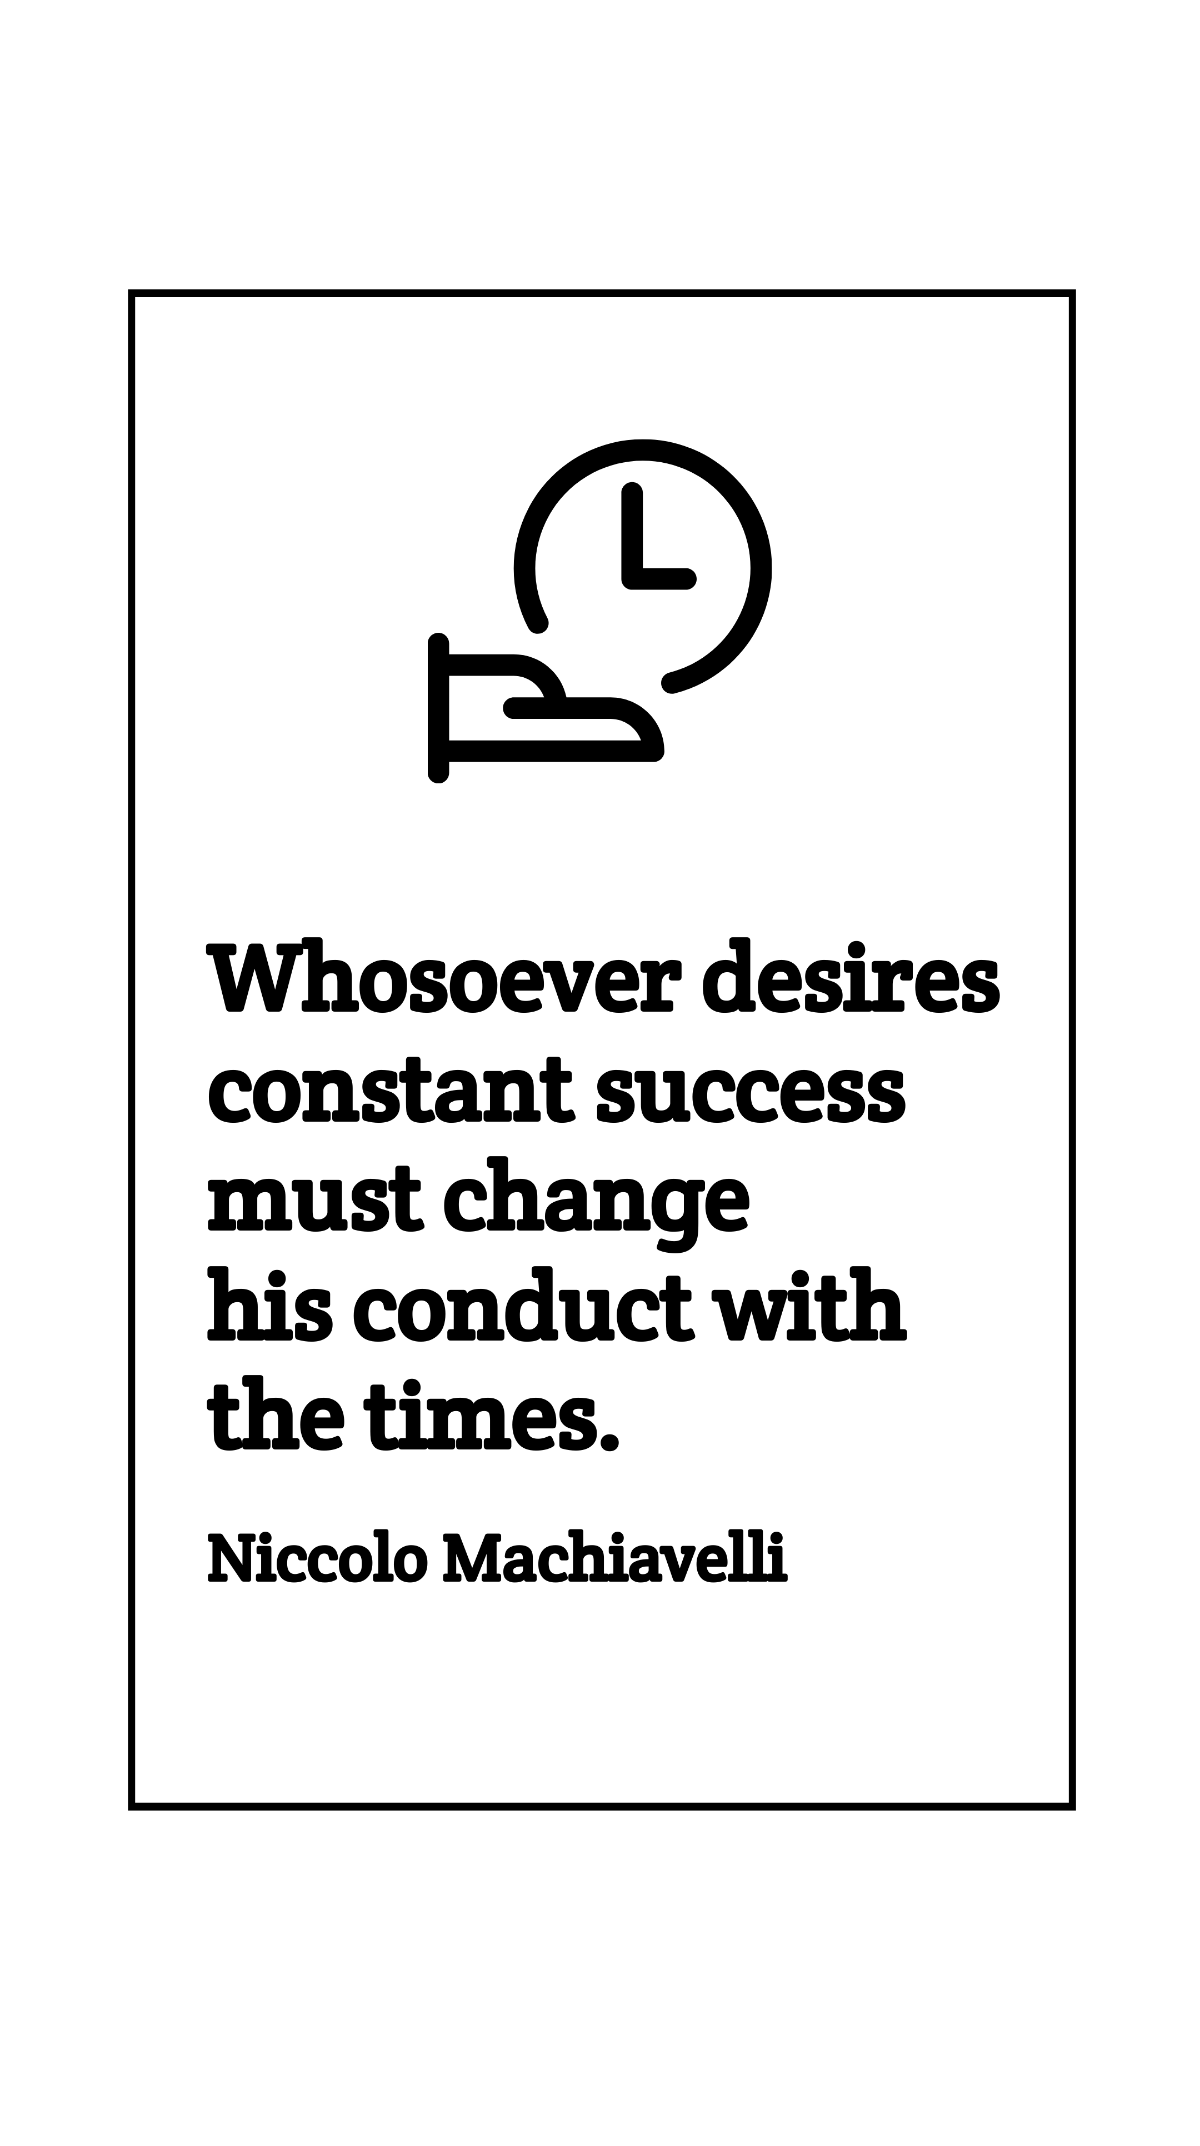 Niccolo Machiavelli - Whosoever desires constant success must change his conduct with the times. Template